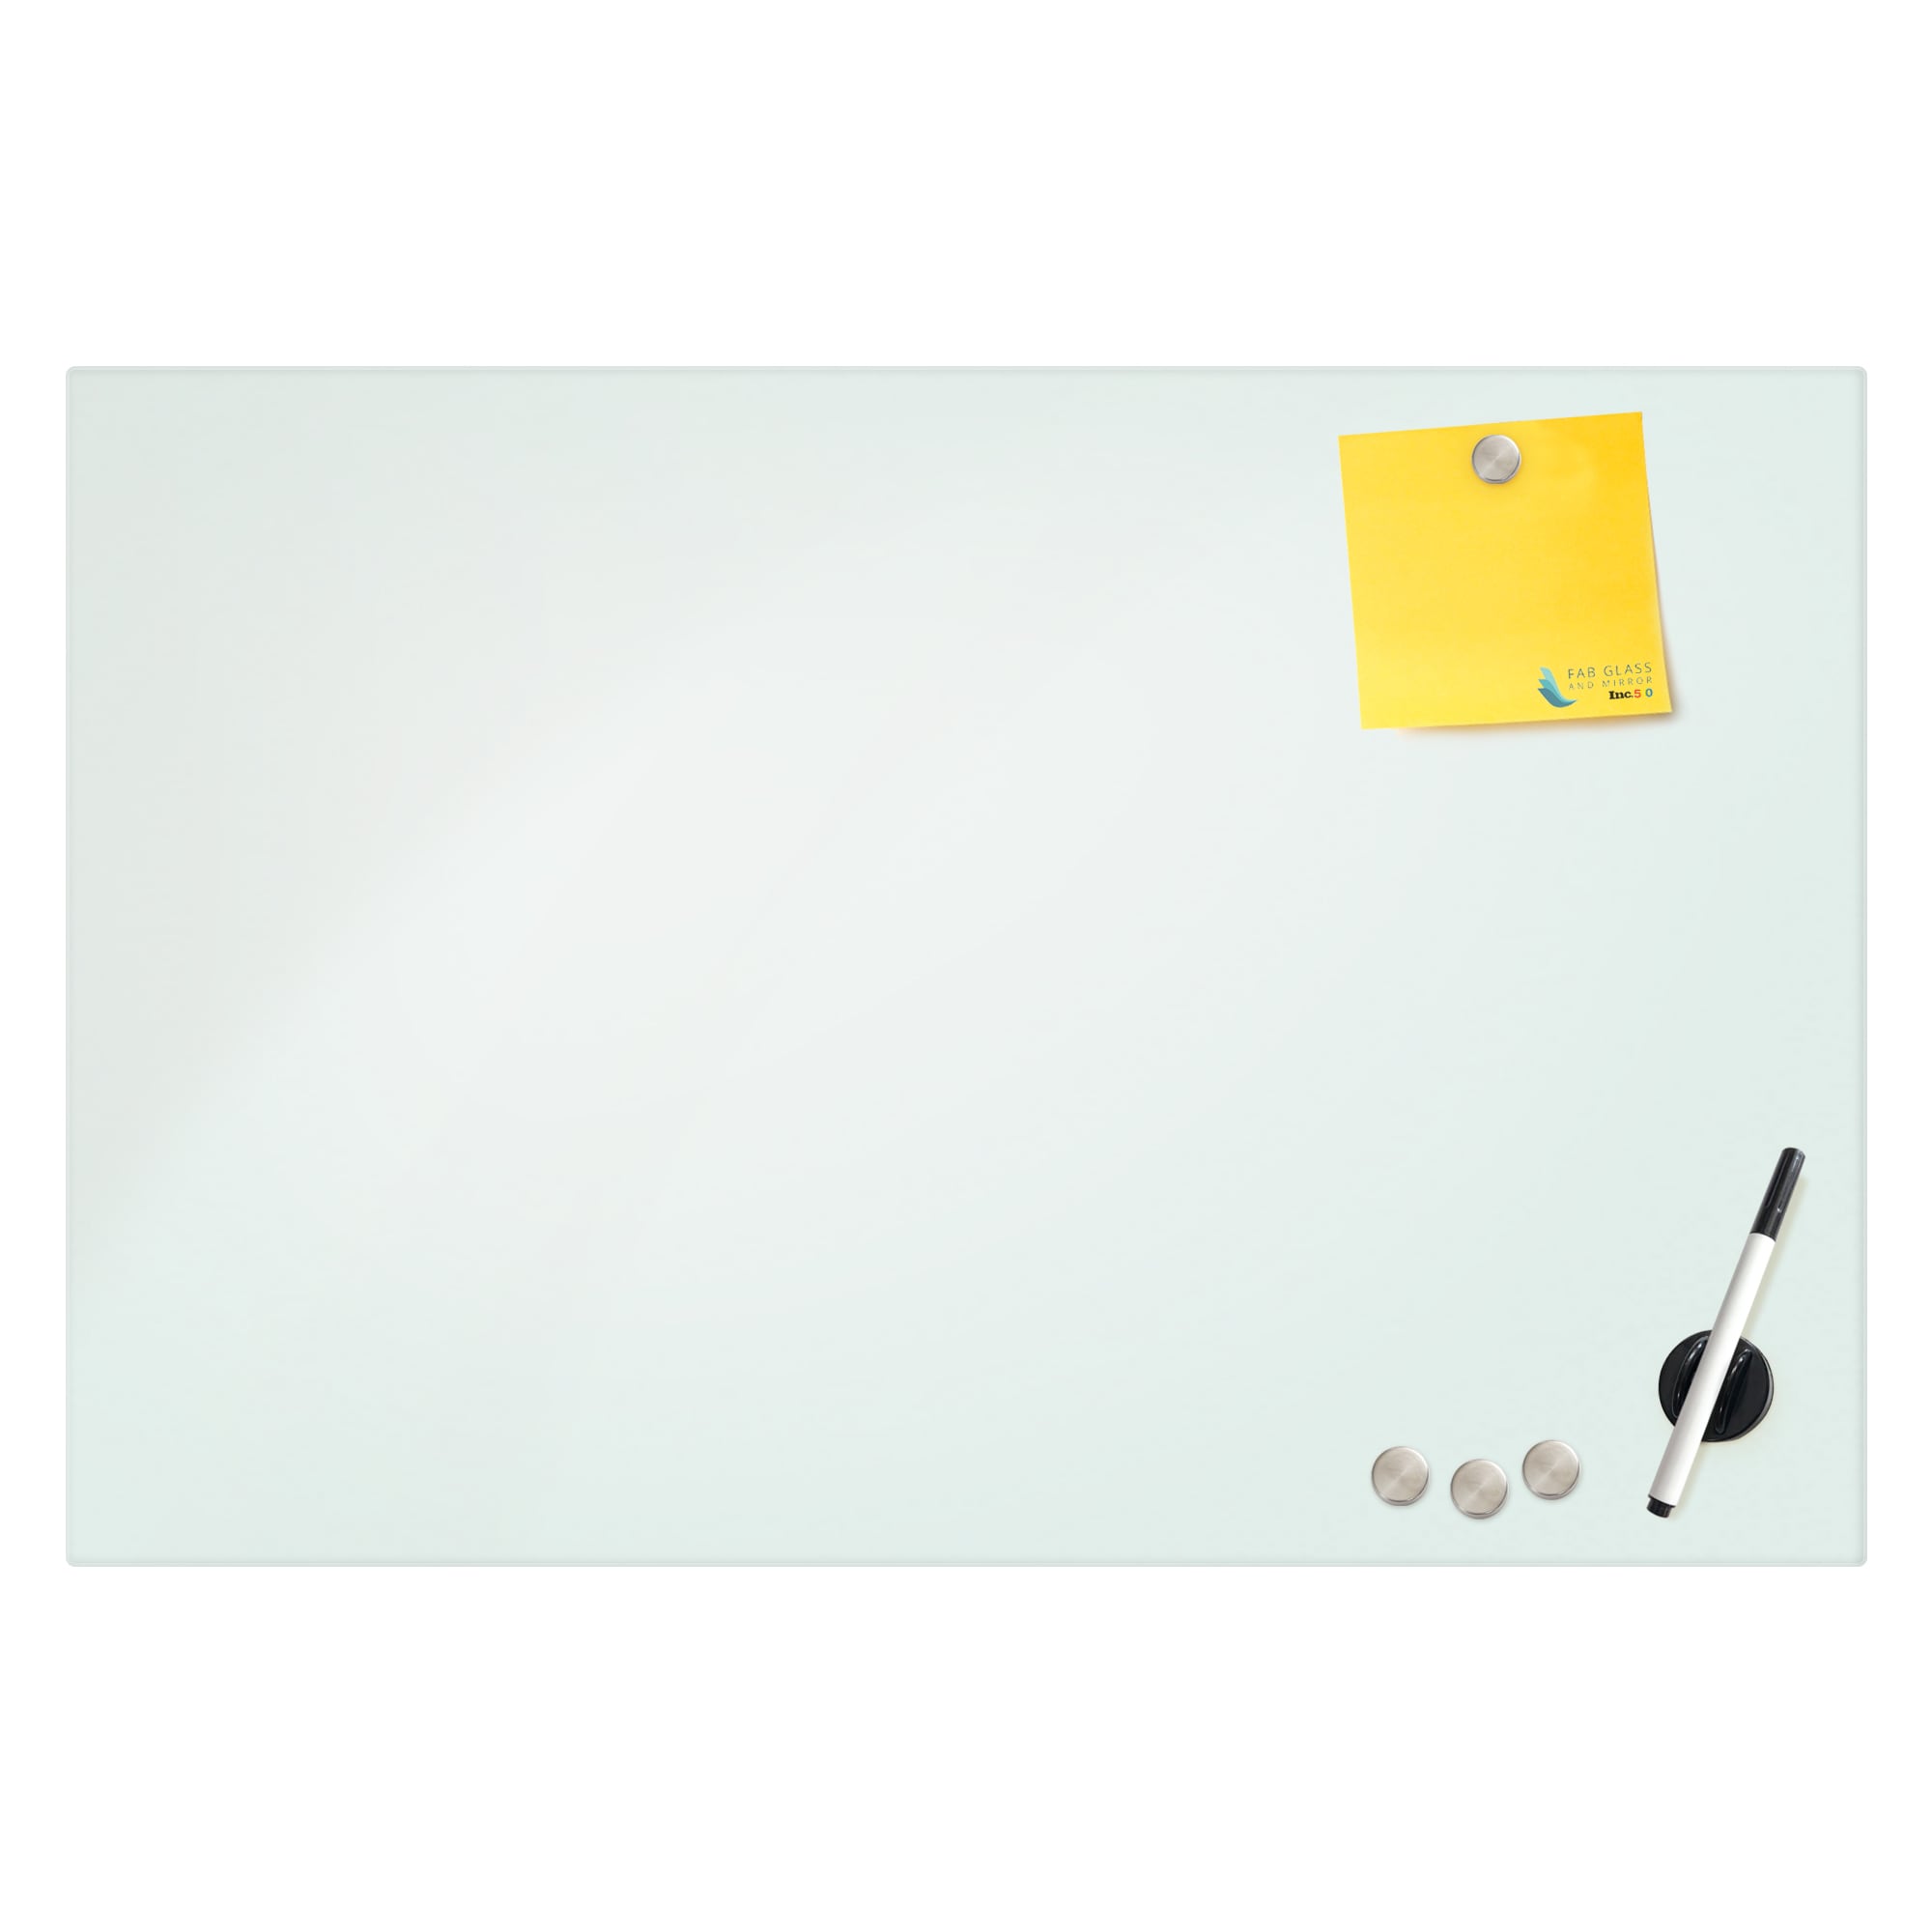 24' X 36' Double-Sided Dry Erase Calendar Whiteboard, Small